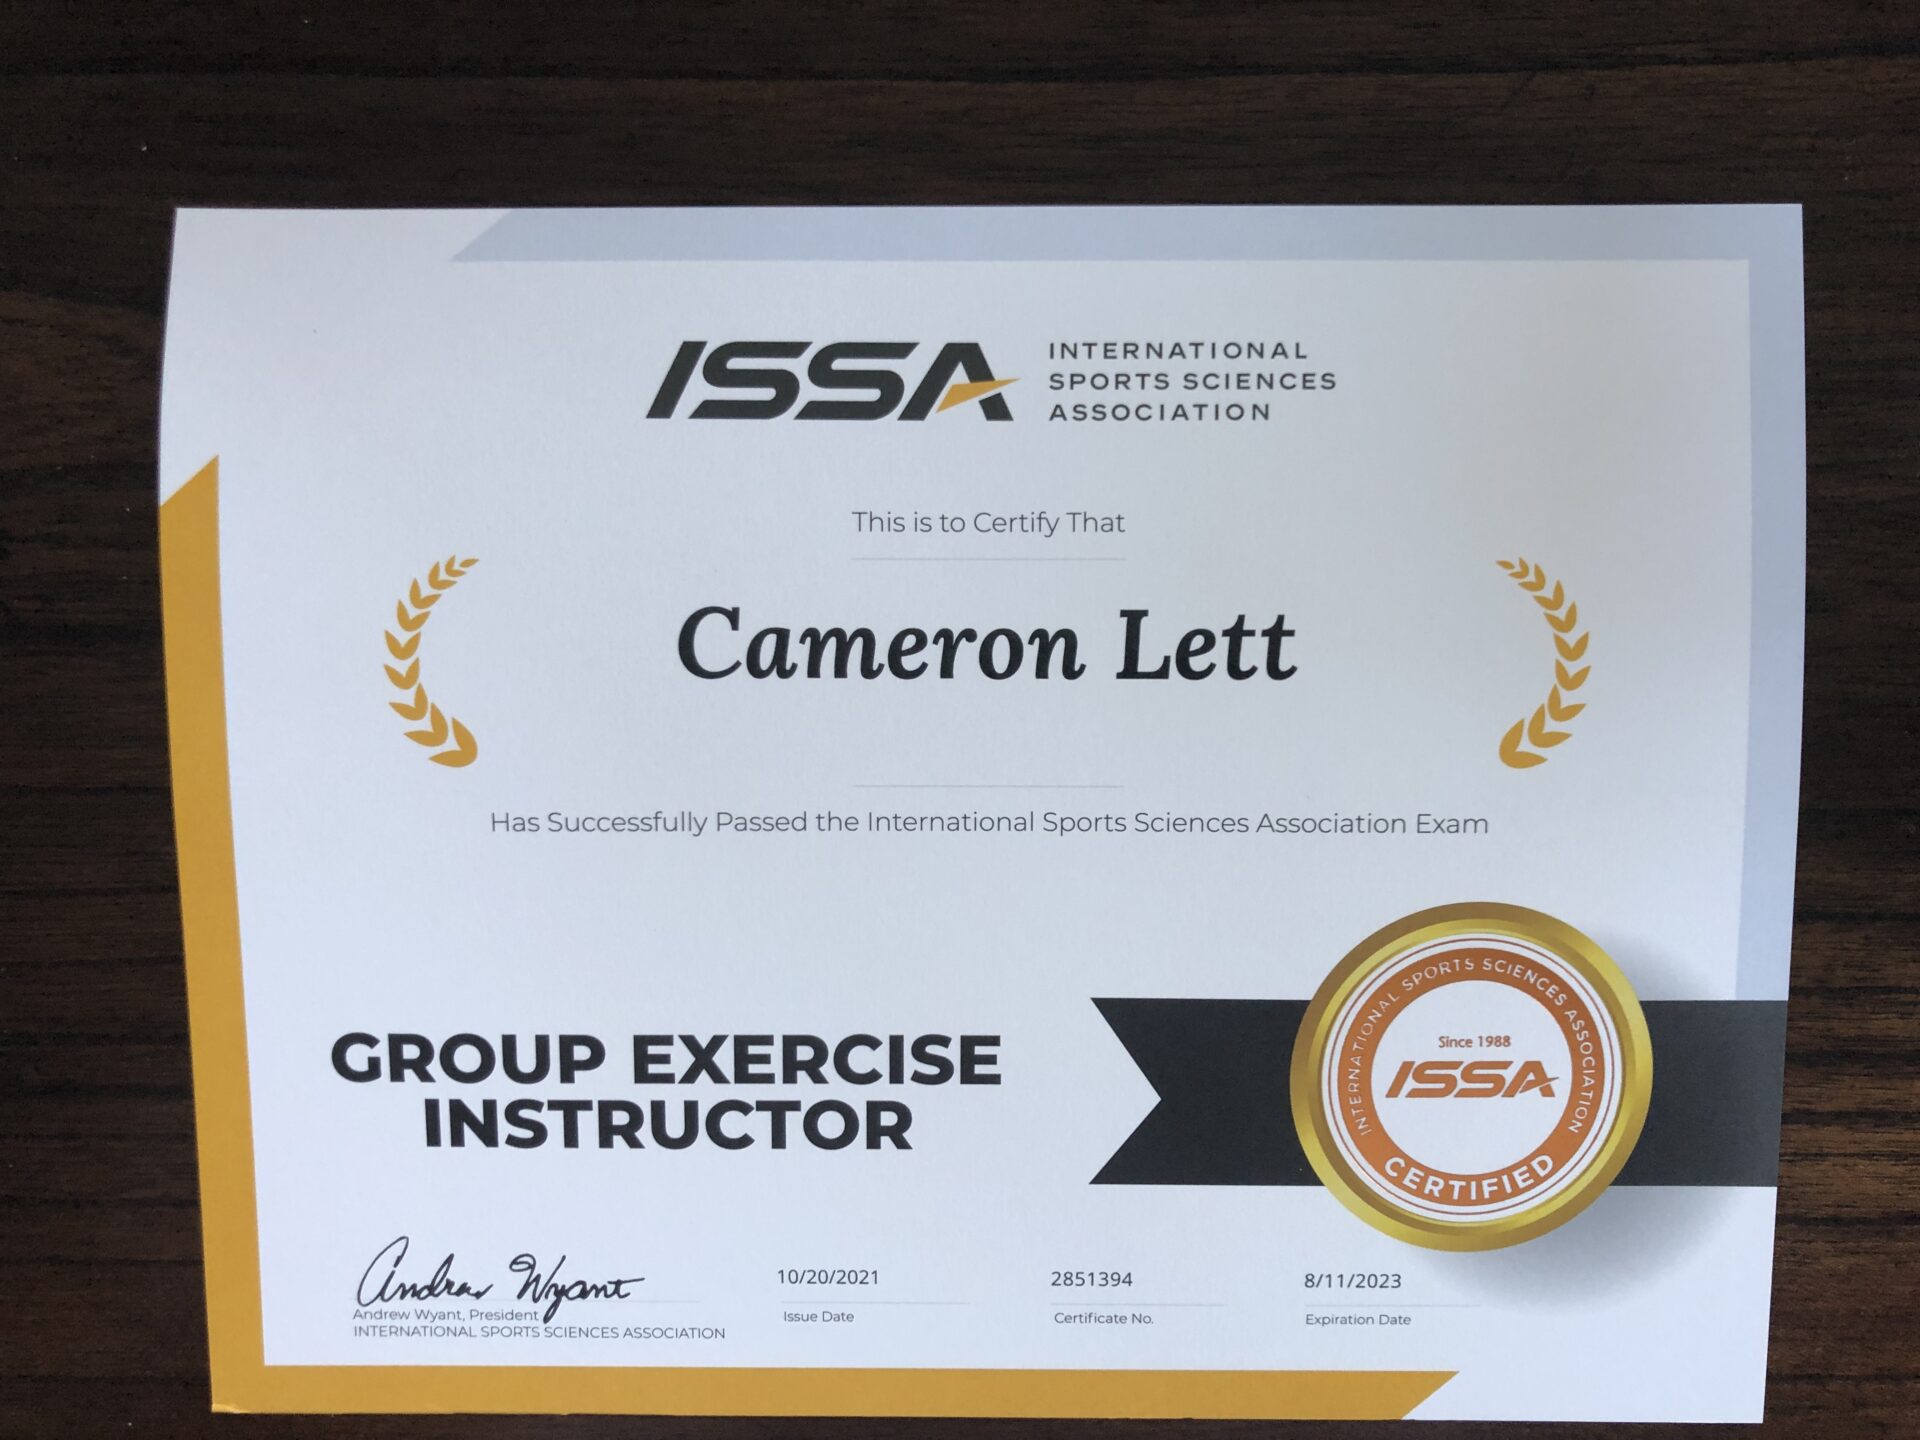 Group exercise instructor certification